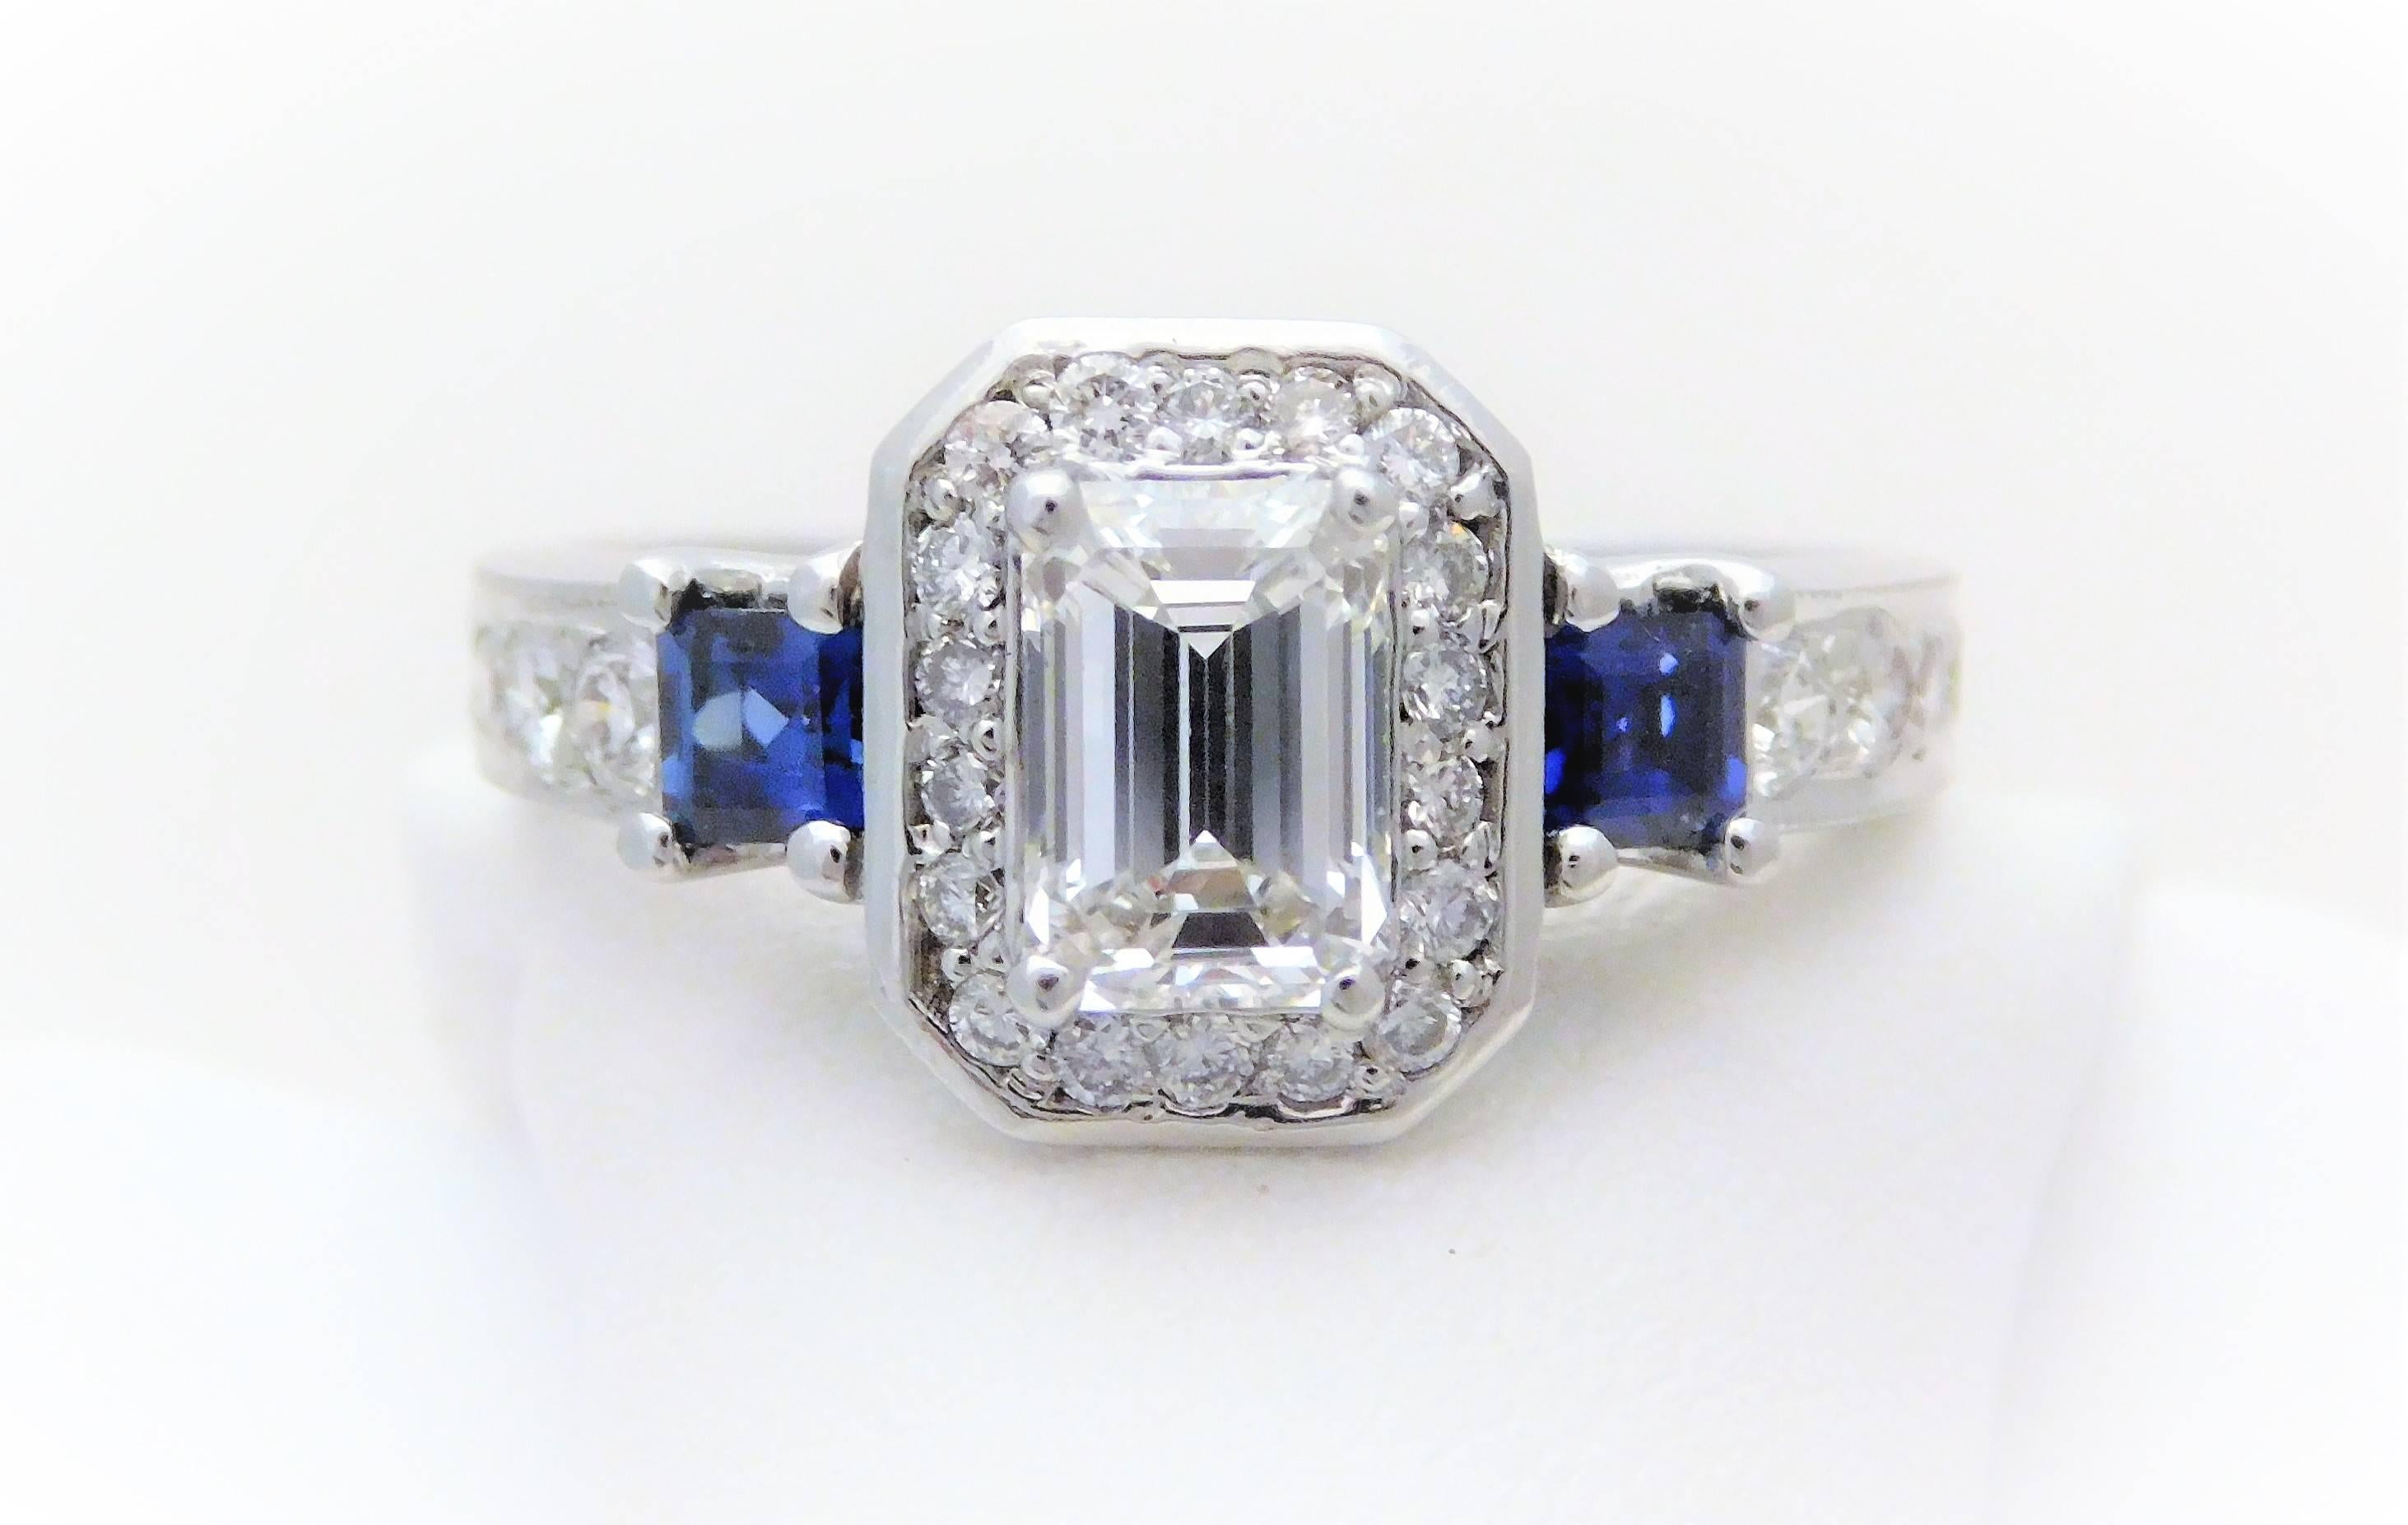 GIA Certified 14k Emerald-Cut Diamond and Ceylon Sapphire Engagement Ring  

From a stately New Orleans estate.  Circa 1970.  This exquisite ring has been hand crafted in solid 14k white gold.  It is masterfully jeweled with an opulent GIA certified